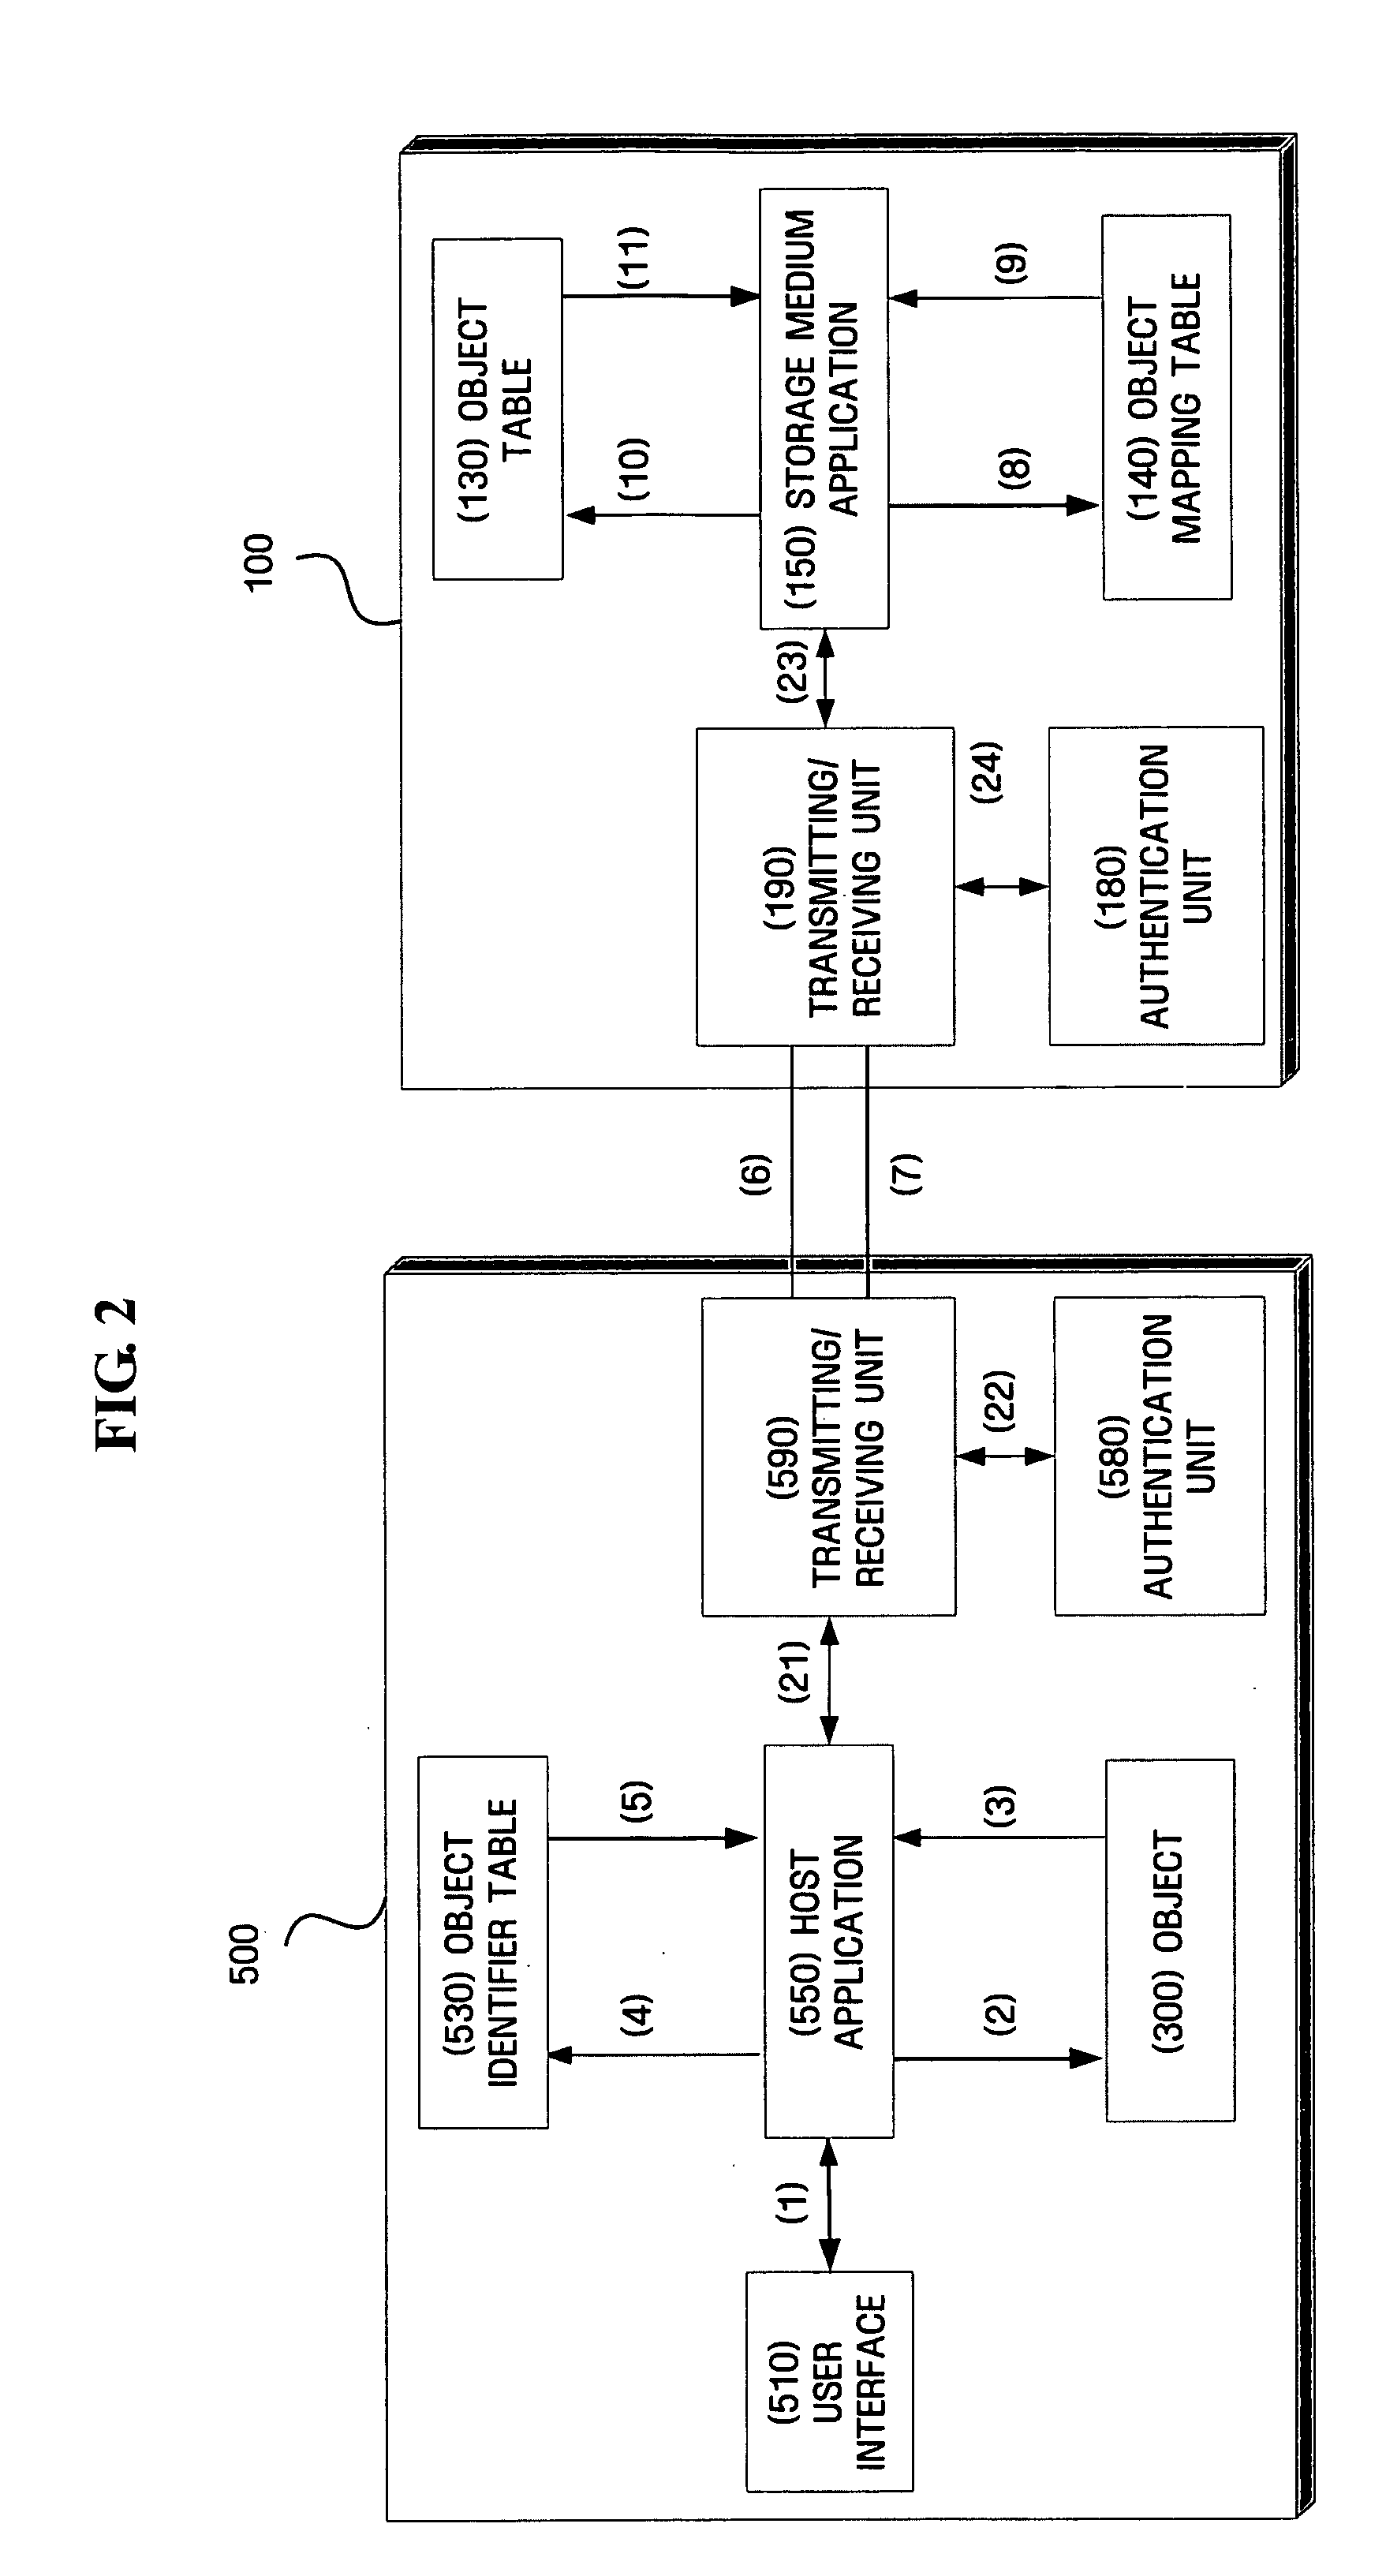 Method and apparatus for searching for rights objects stored in portable storage device object identifier